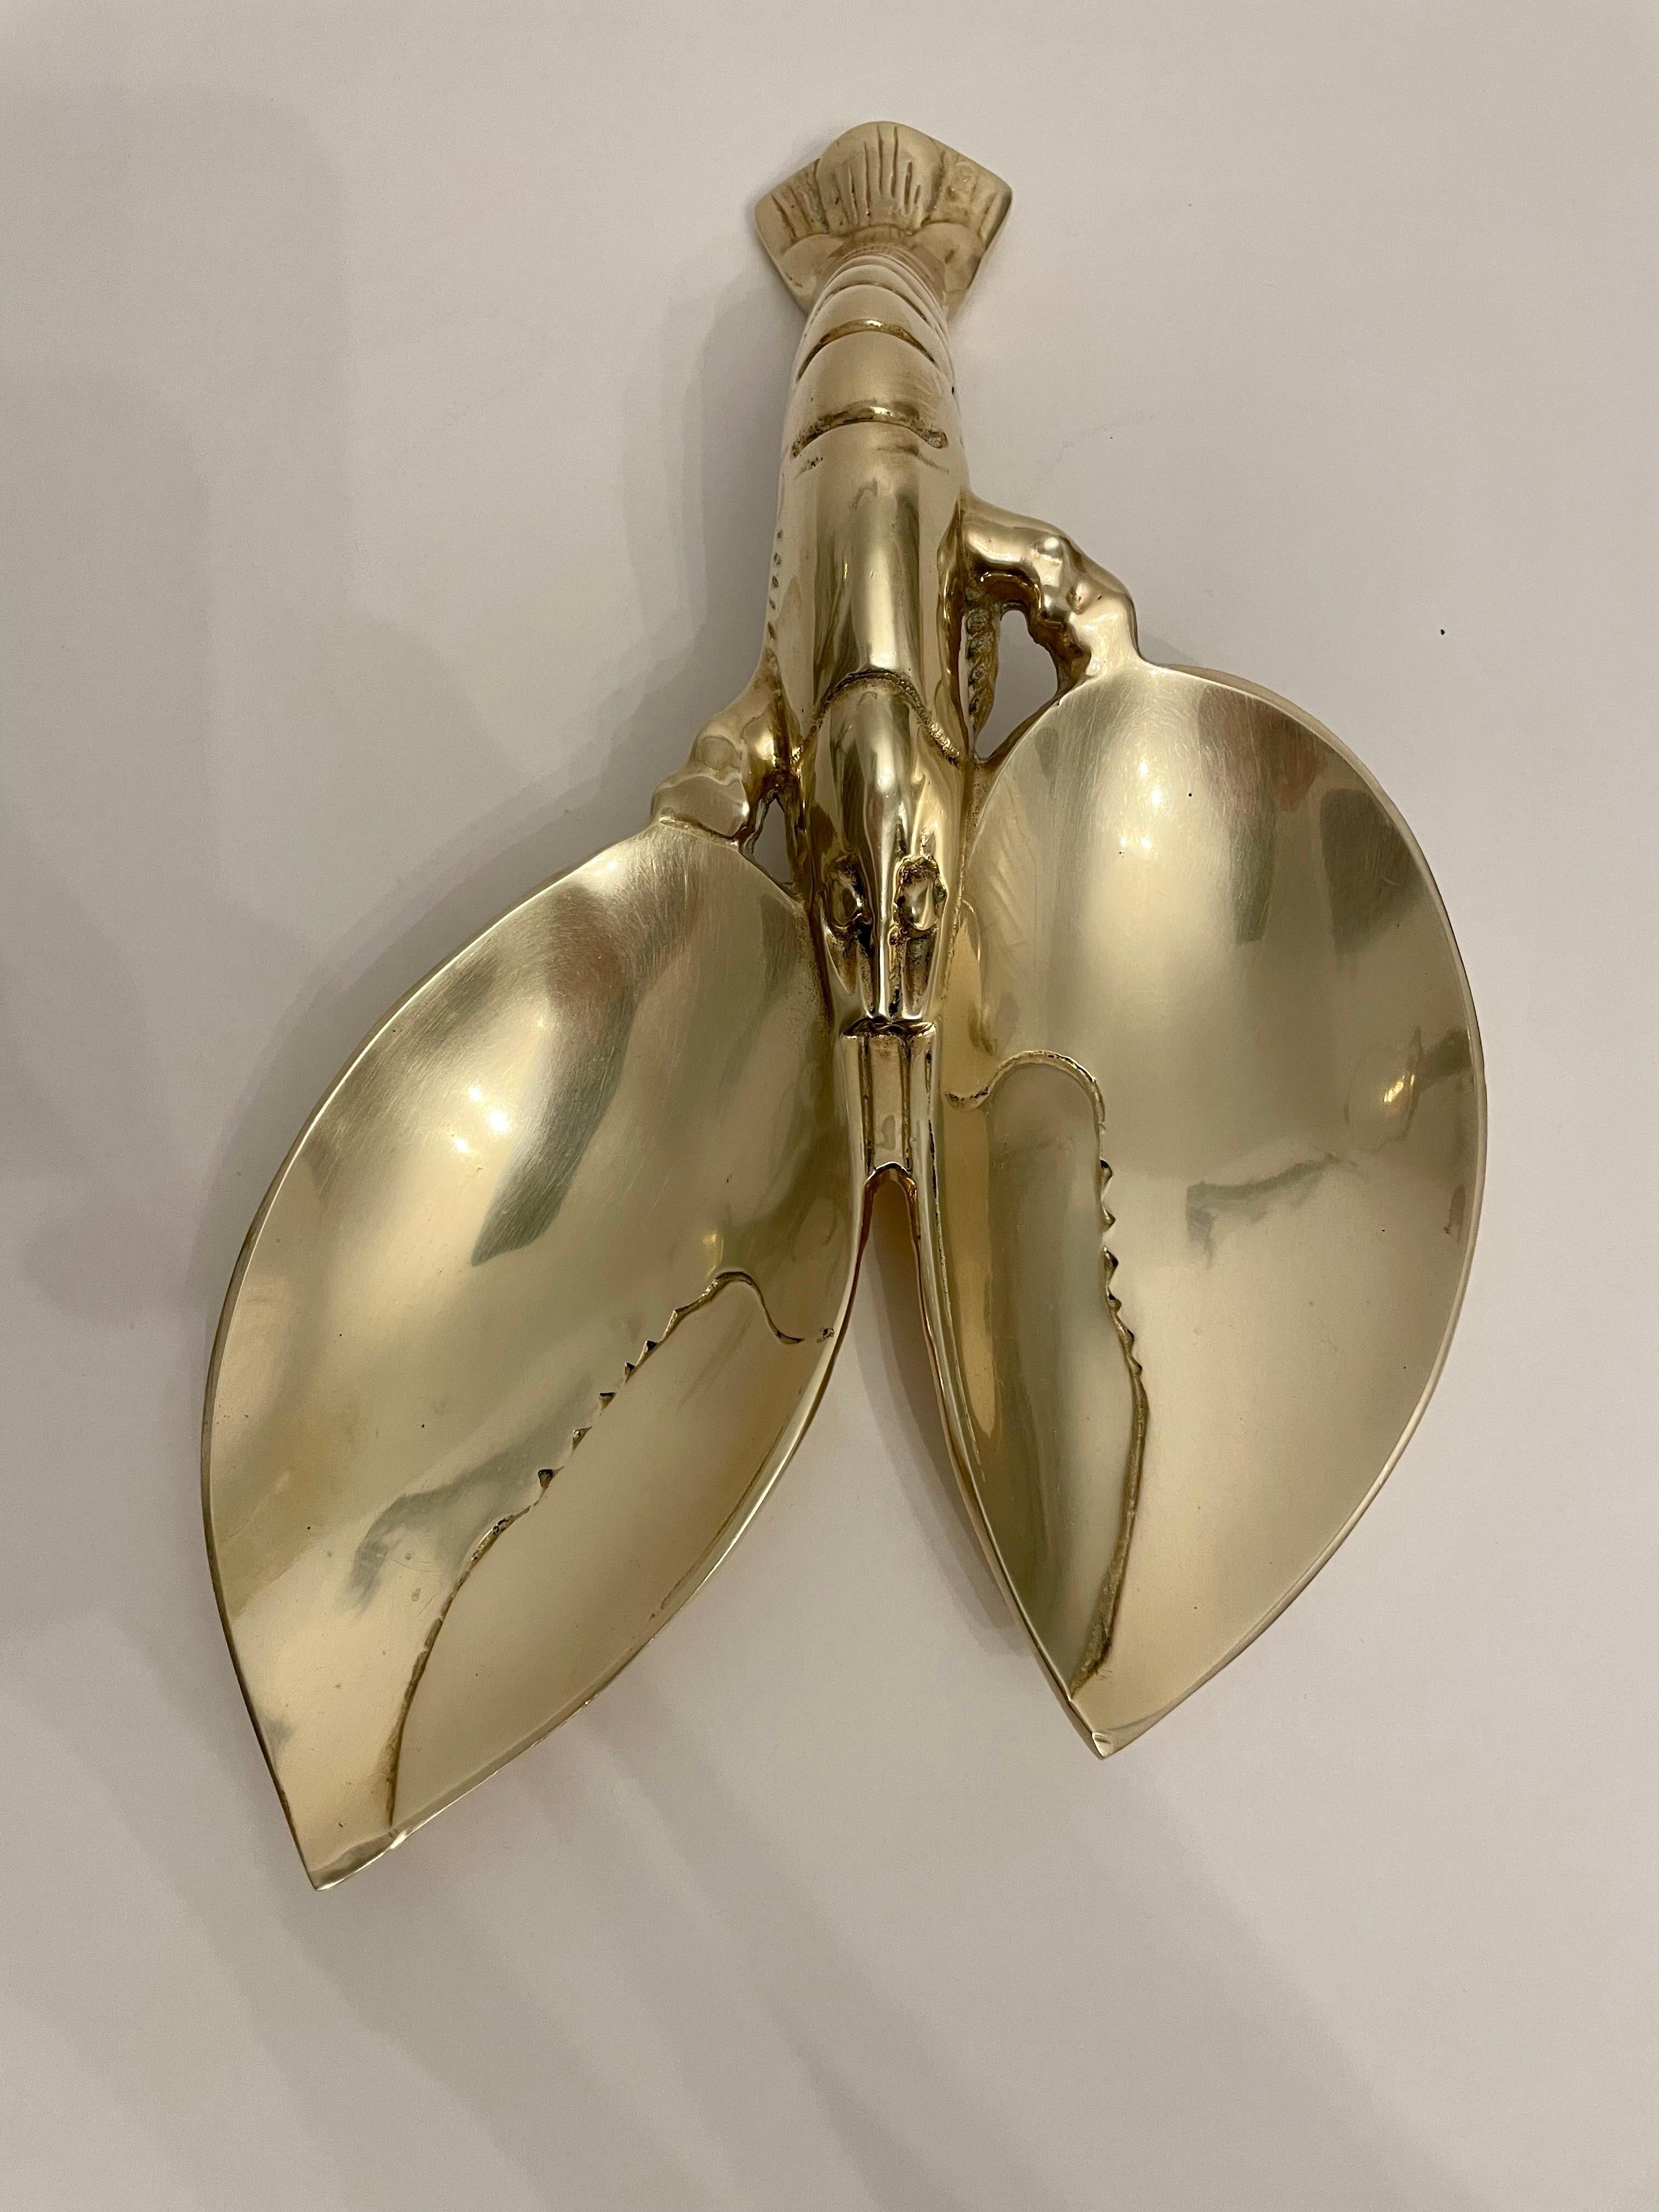 Large Brass Lobster Dish or Spoon Rest Sculpture For Sale 3